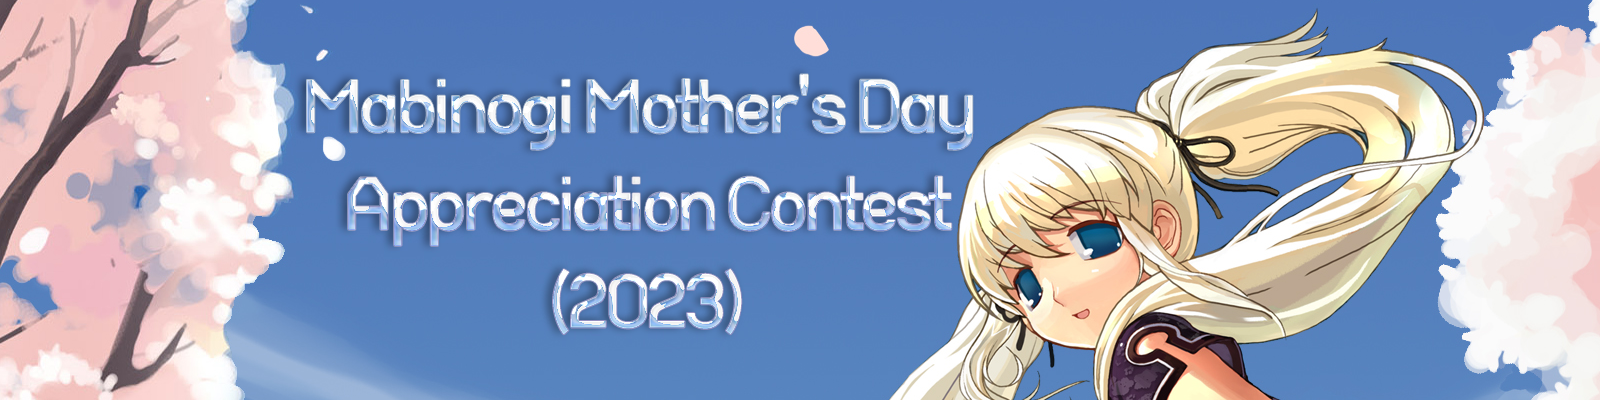 mabinogi-mothers-day-appreciation-contest-nanner.png